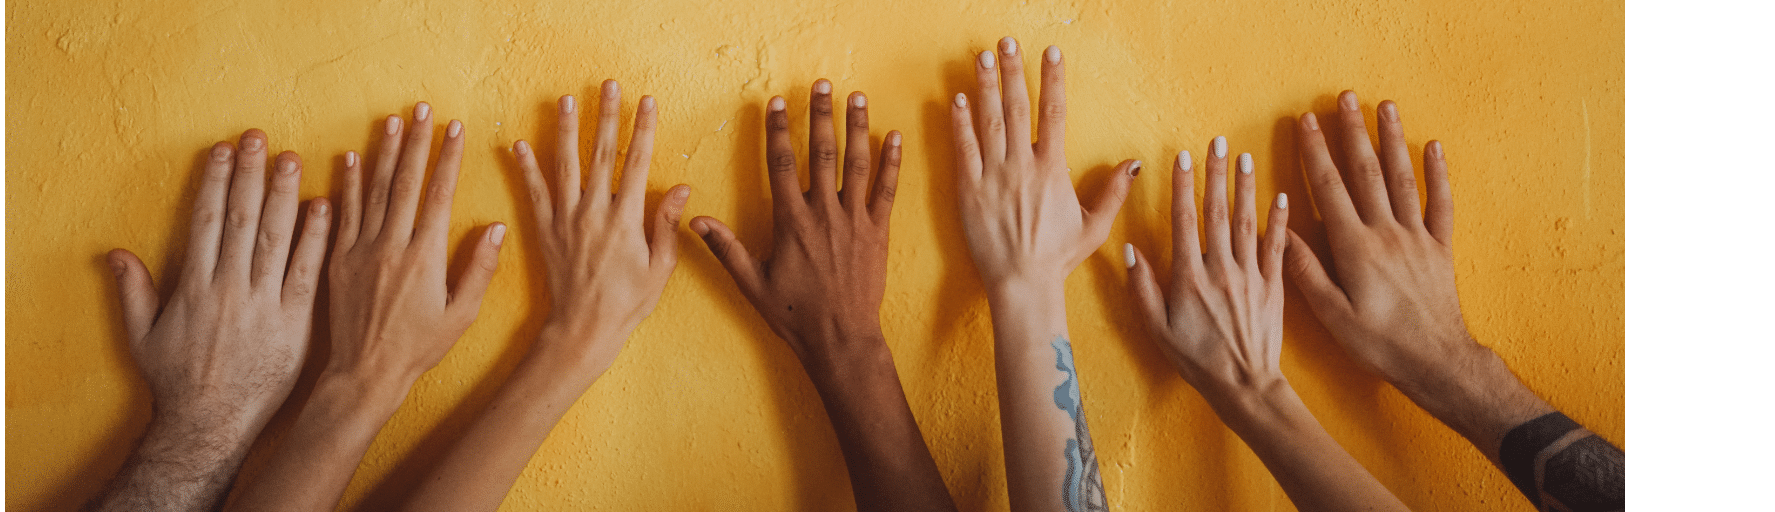 Hands against a yellow wall